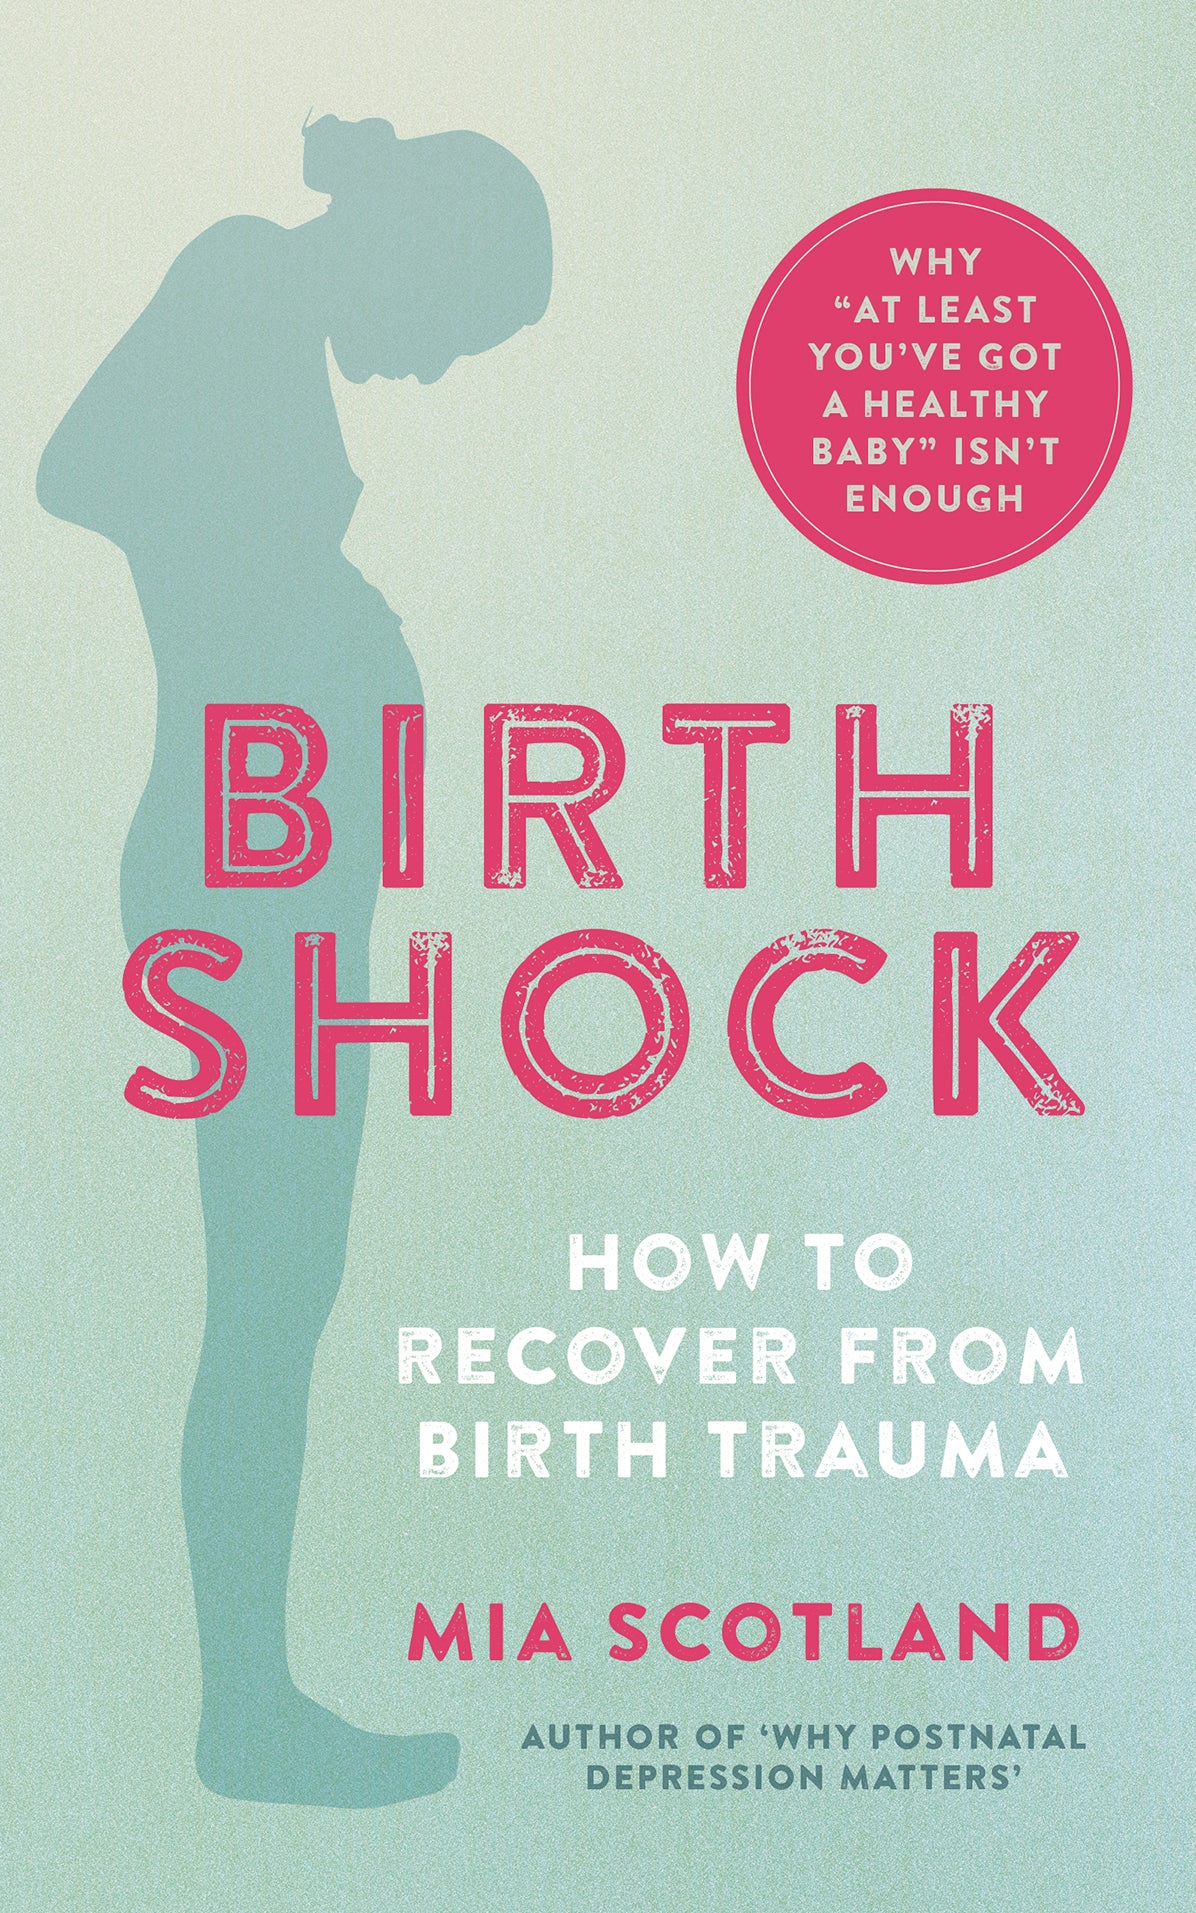 Birth Shock: How to recover from birth trauma - why 'at least you've got a healthy baby' isn't enough